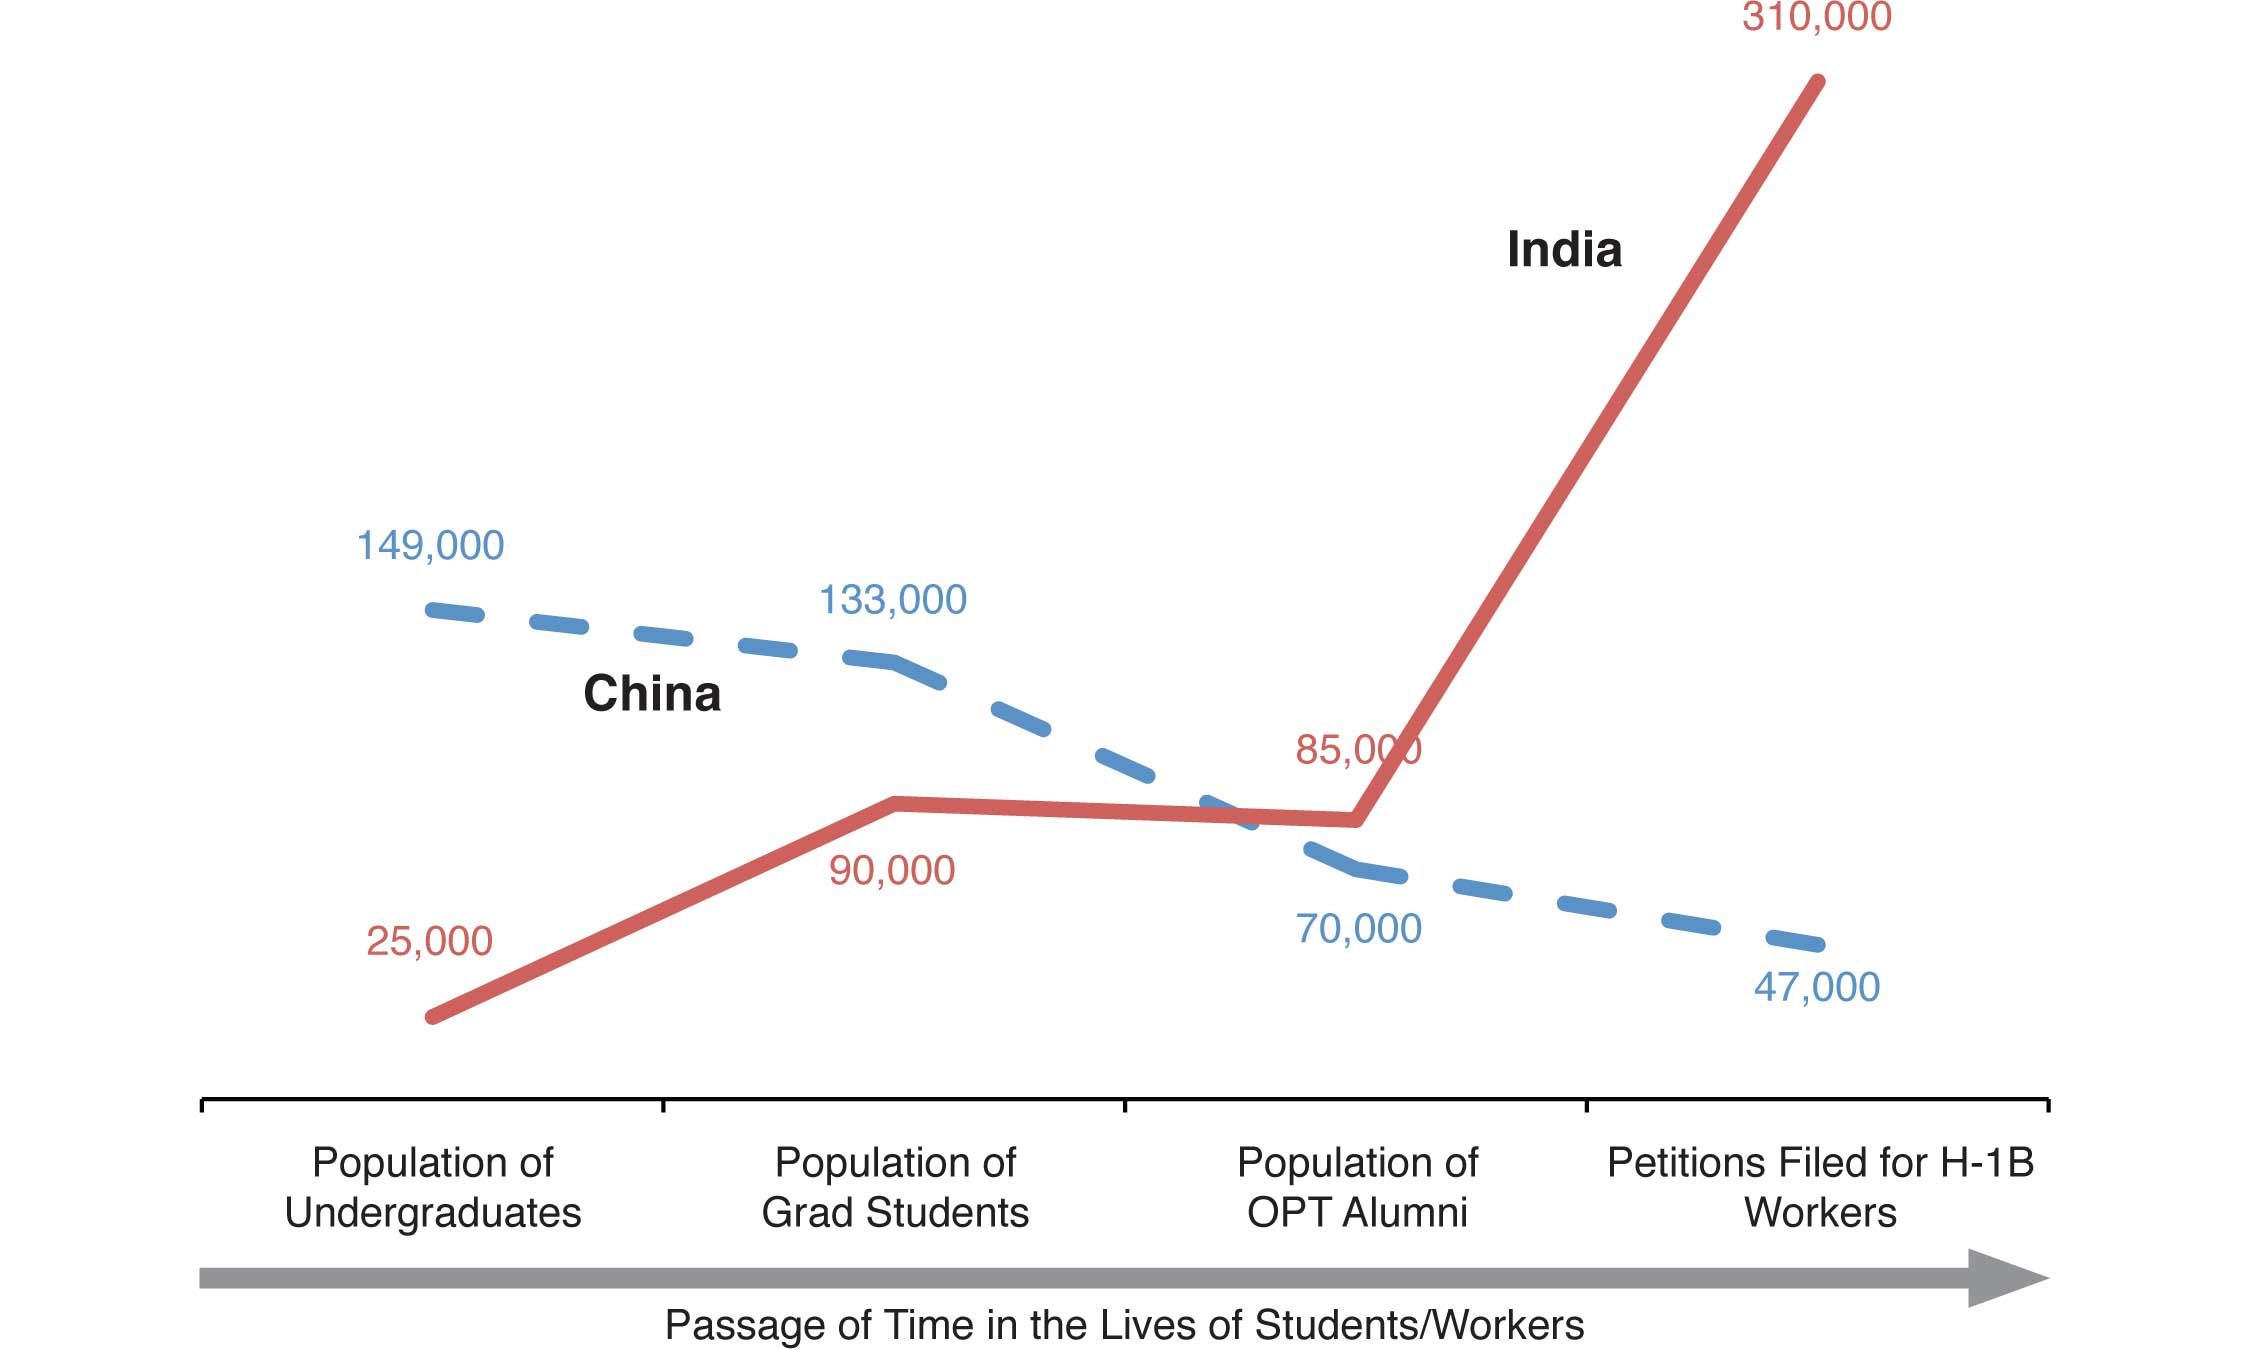 Foreign Students and Foreign Workers From China and India, 2018